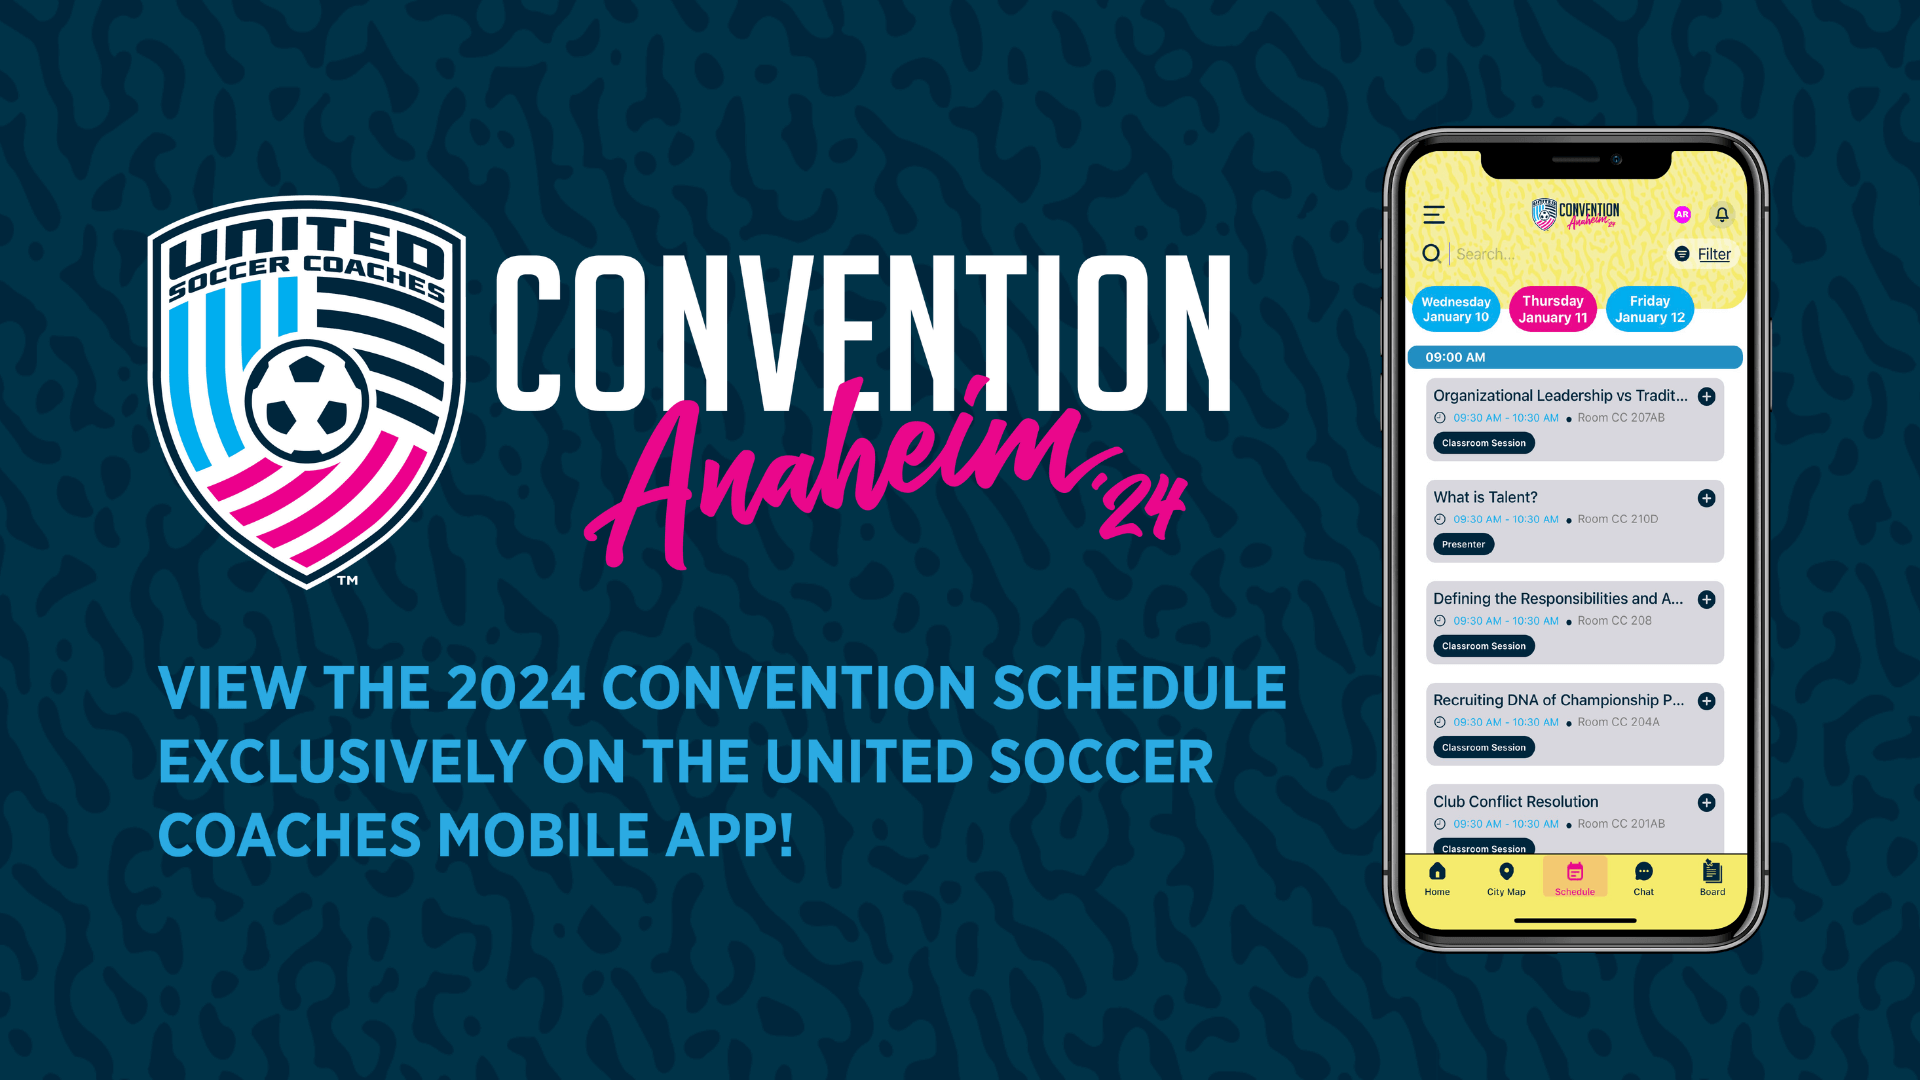 The 2024 United Soccer Coaches Convention